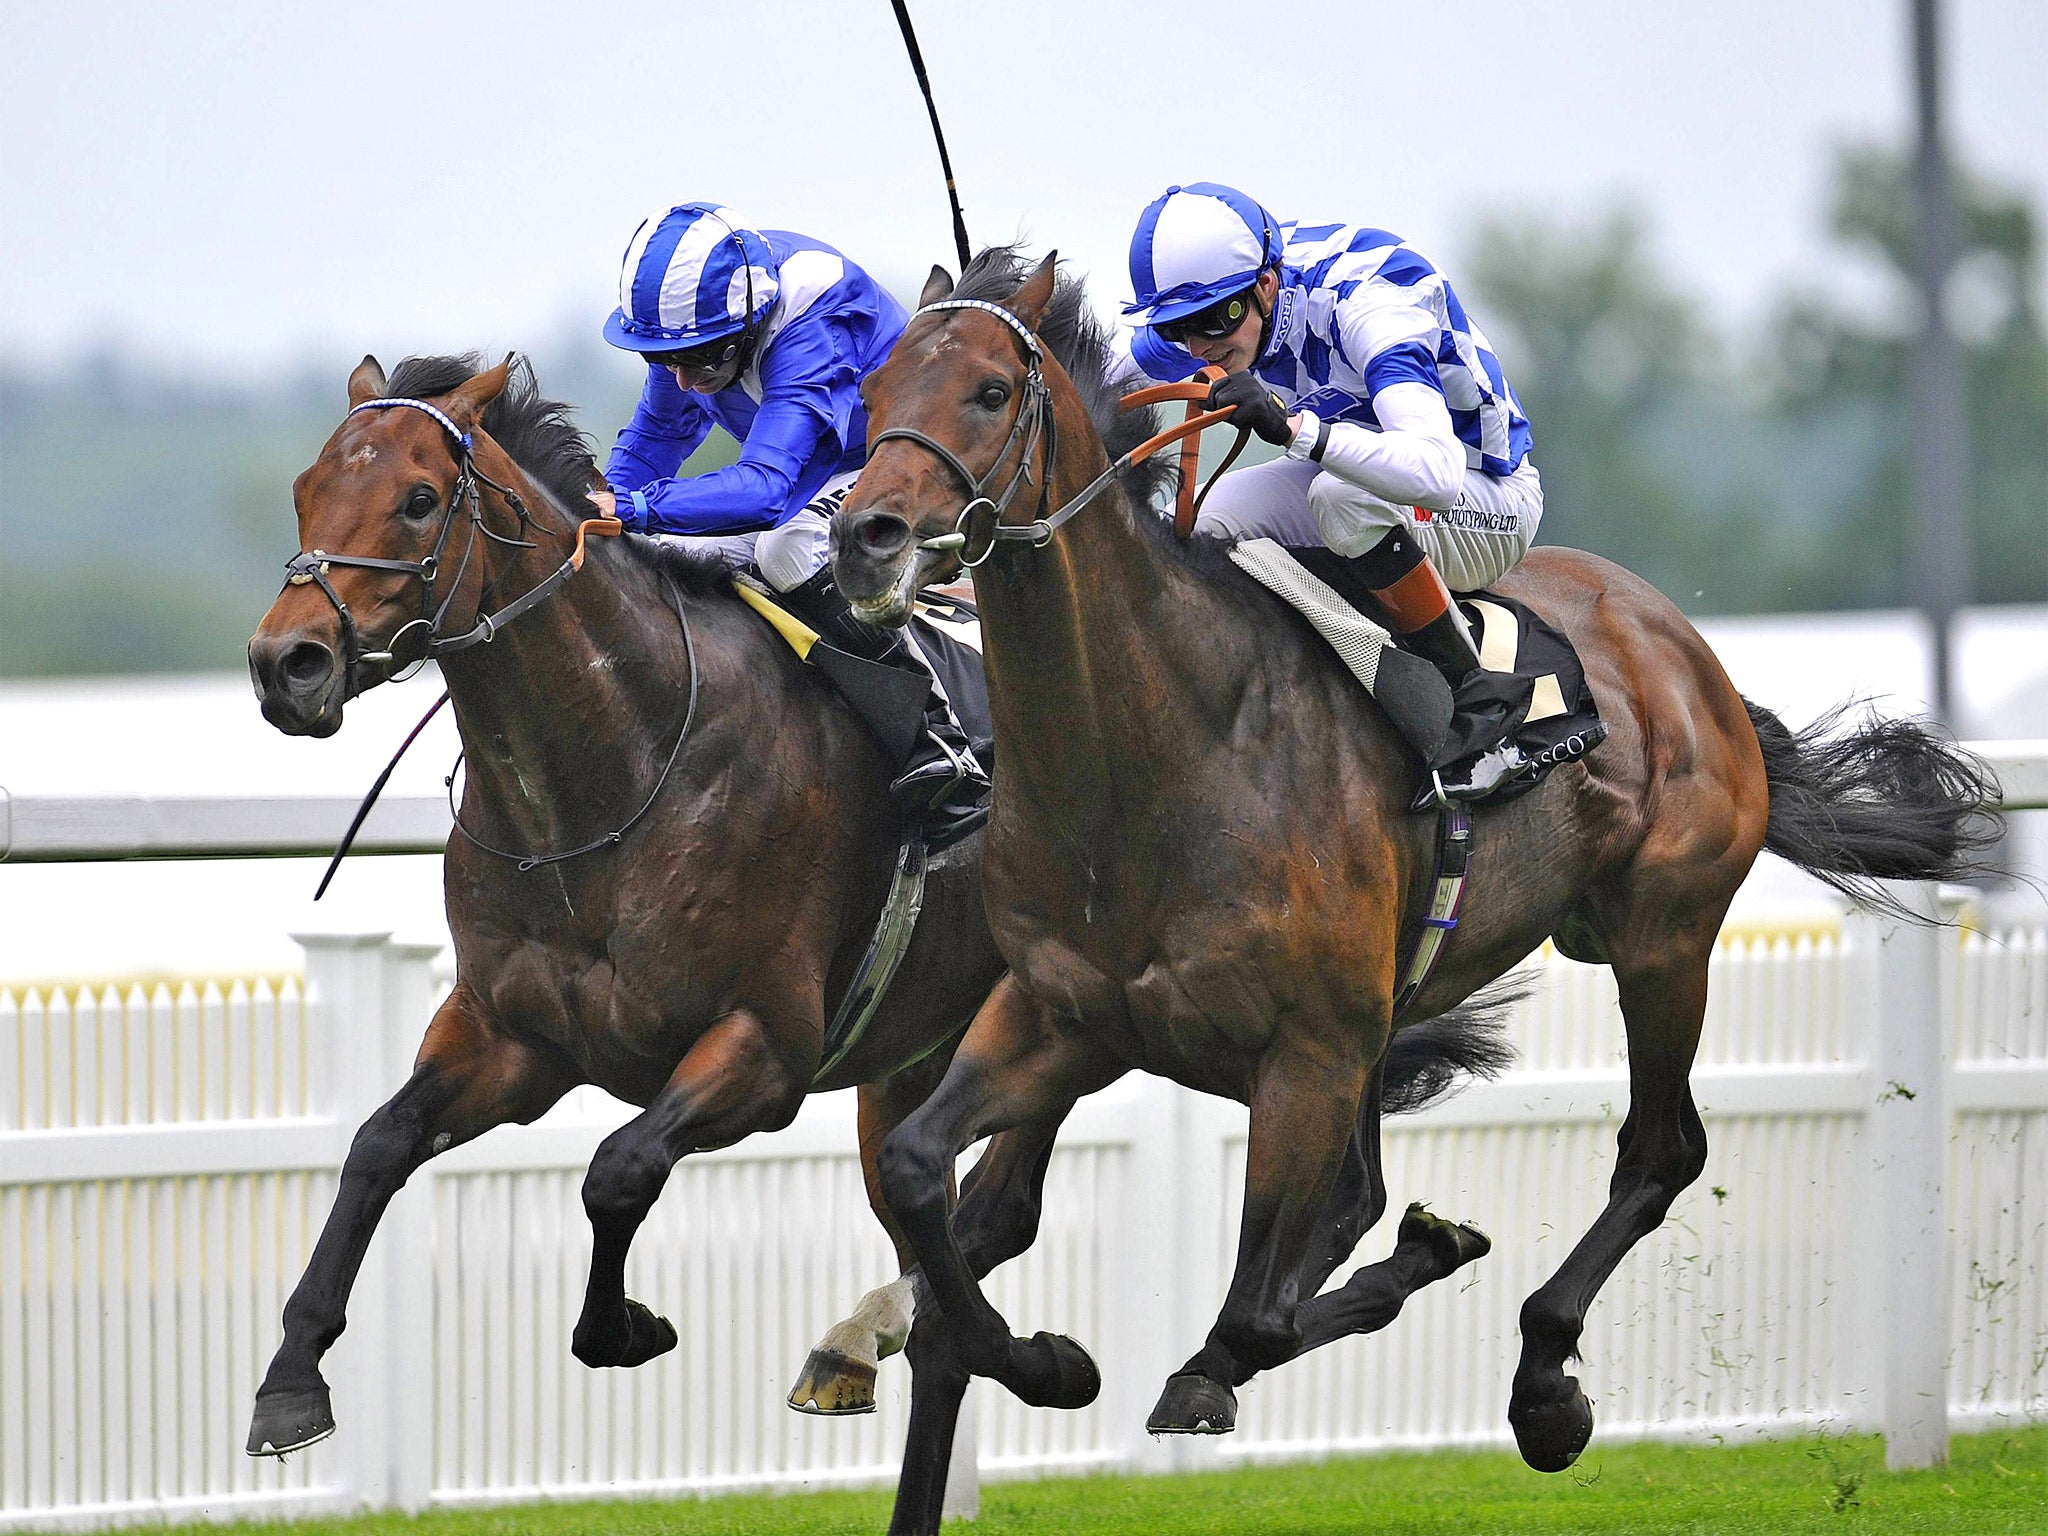 James Doyle on Al Kazeem (right) collars Mukhadram, ridden by Paul Hanagan, to land the Prince of Wales’s Stakes at Royal Ascot